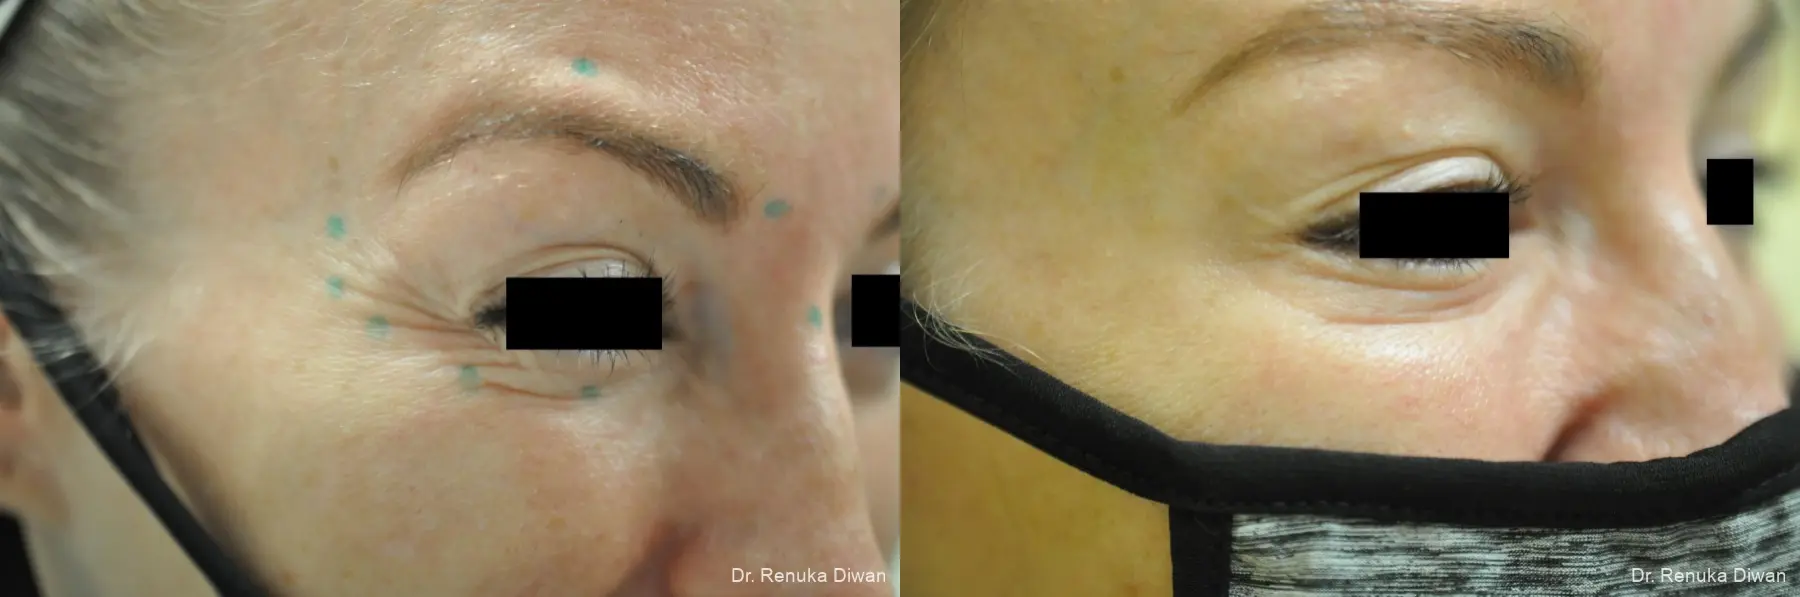 BOTOX® Cosmetic: Patient 33 - Before and After 1